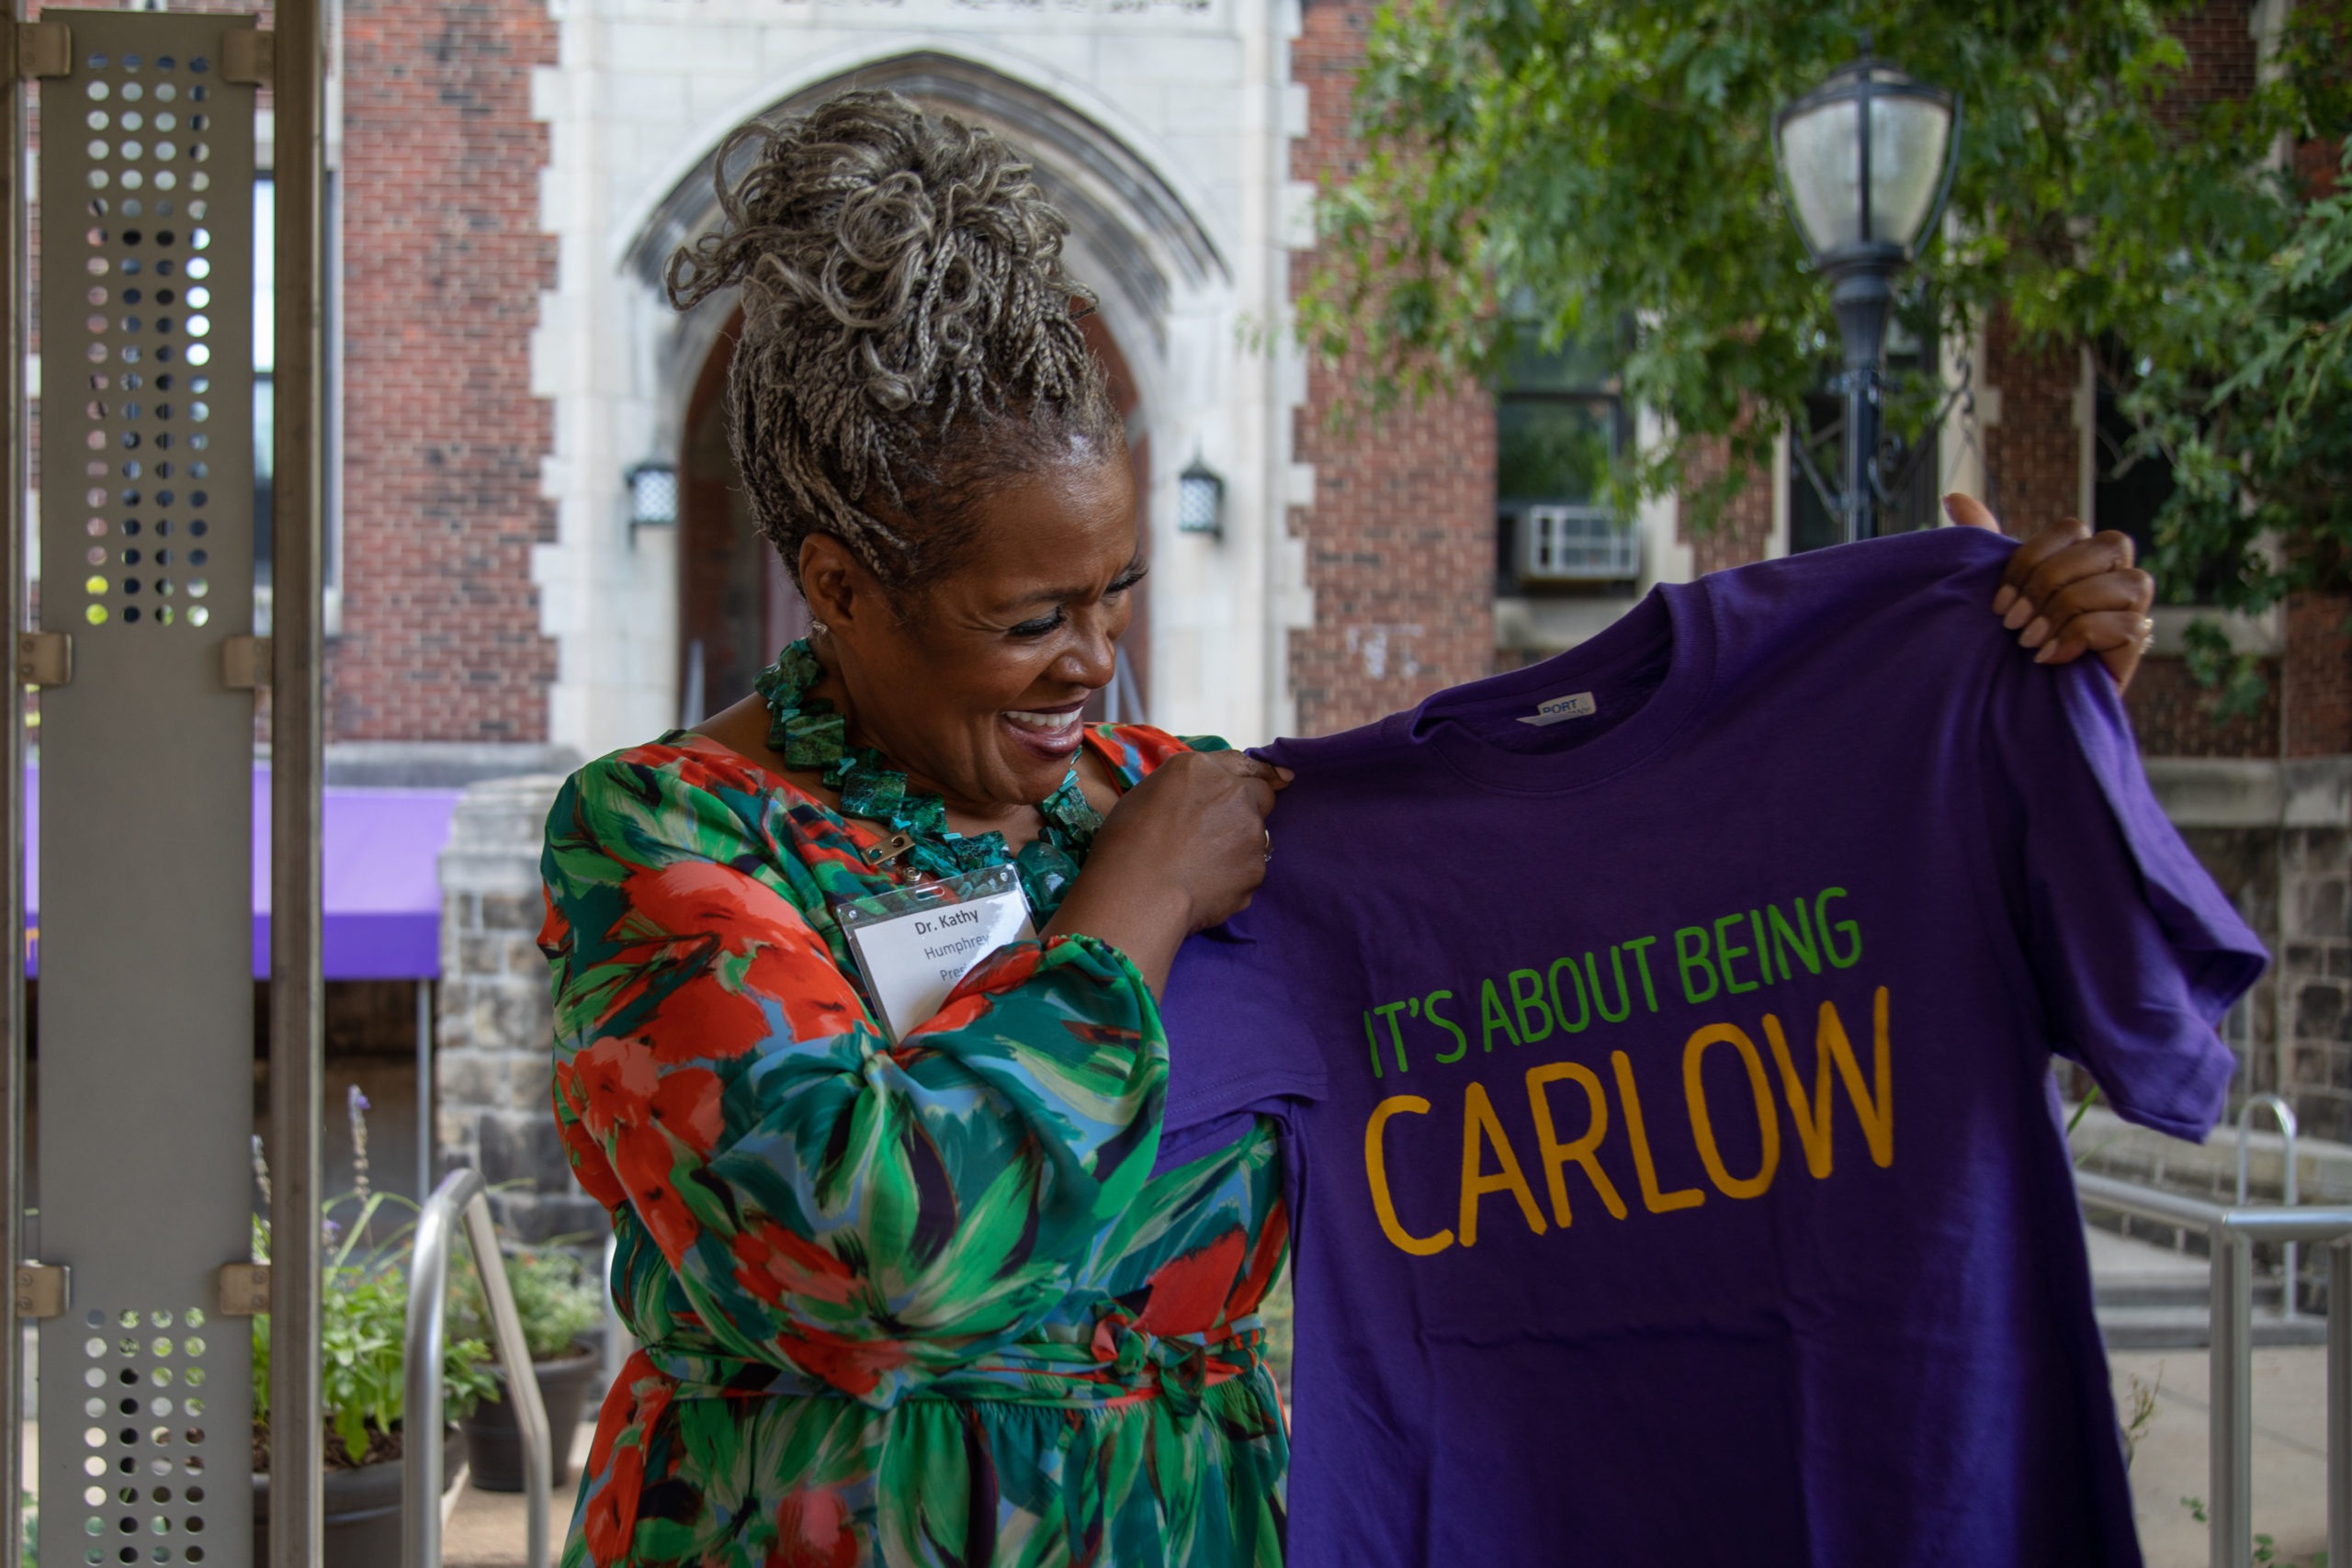 Dr. Humphrey holds a tshirt that reads It's about being Carlow.